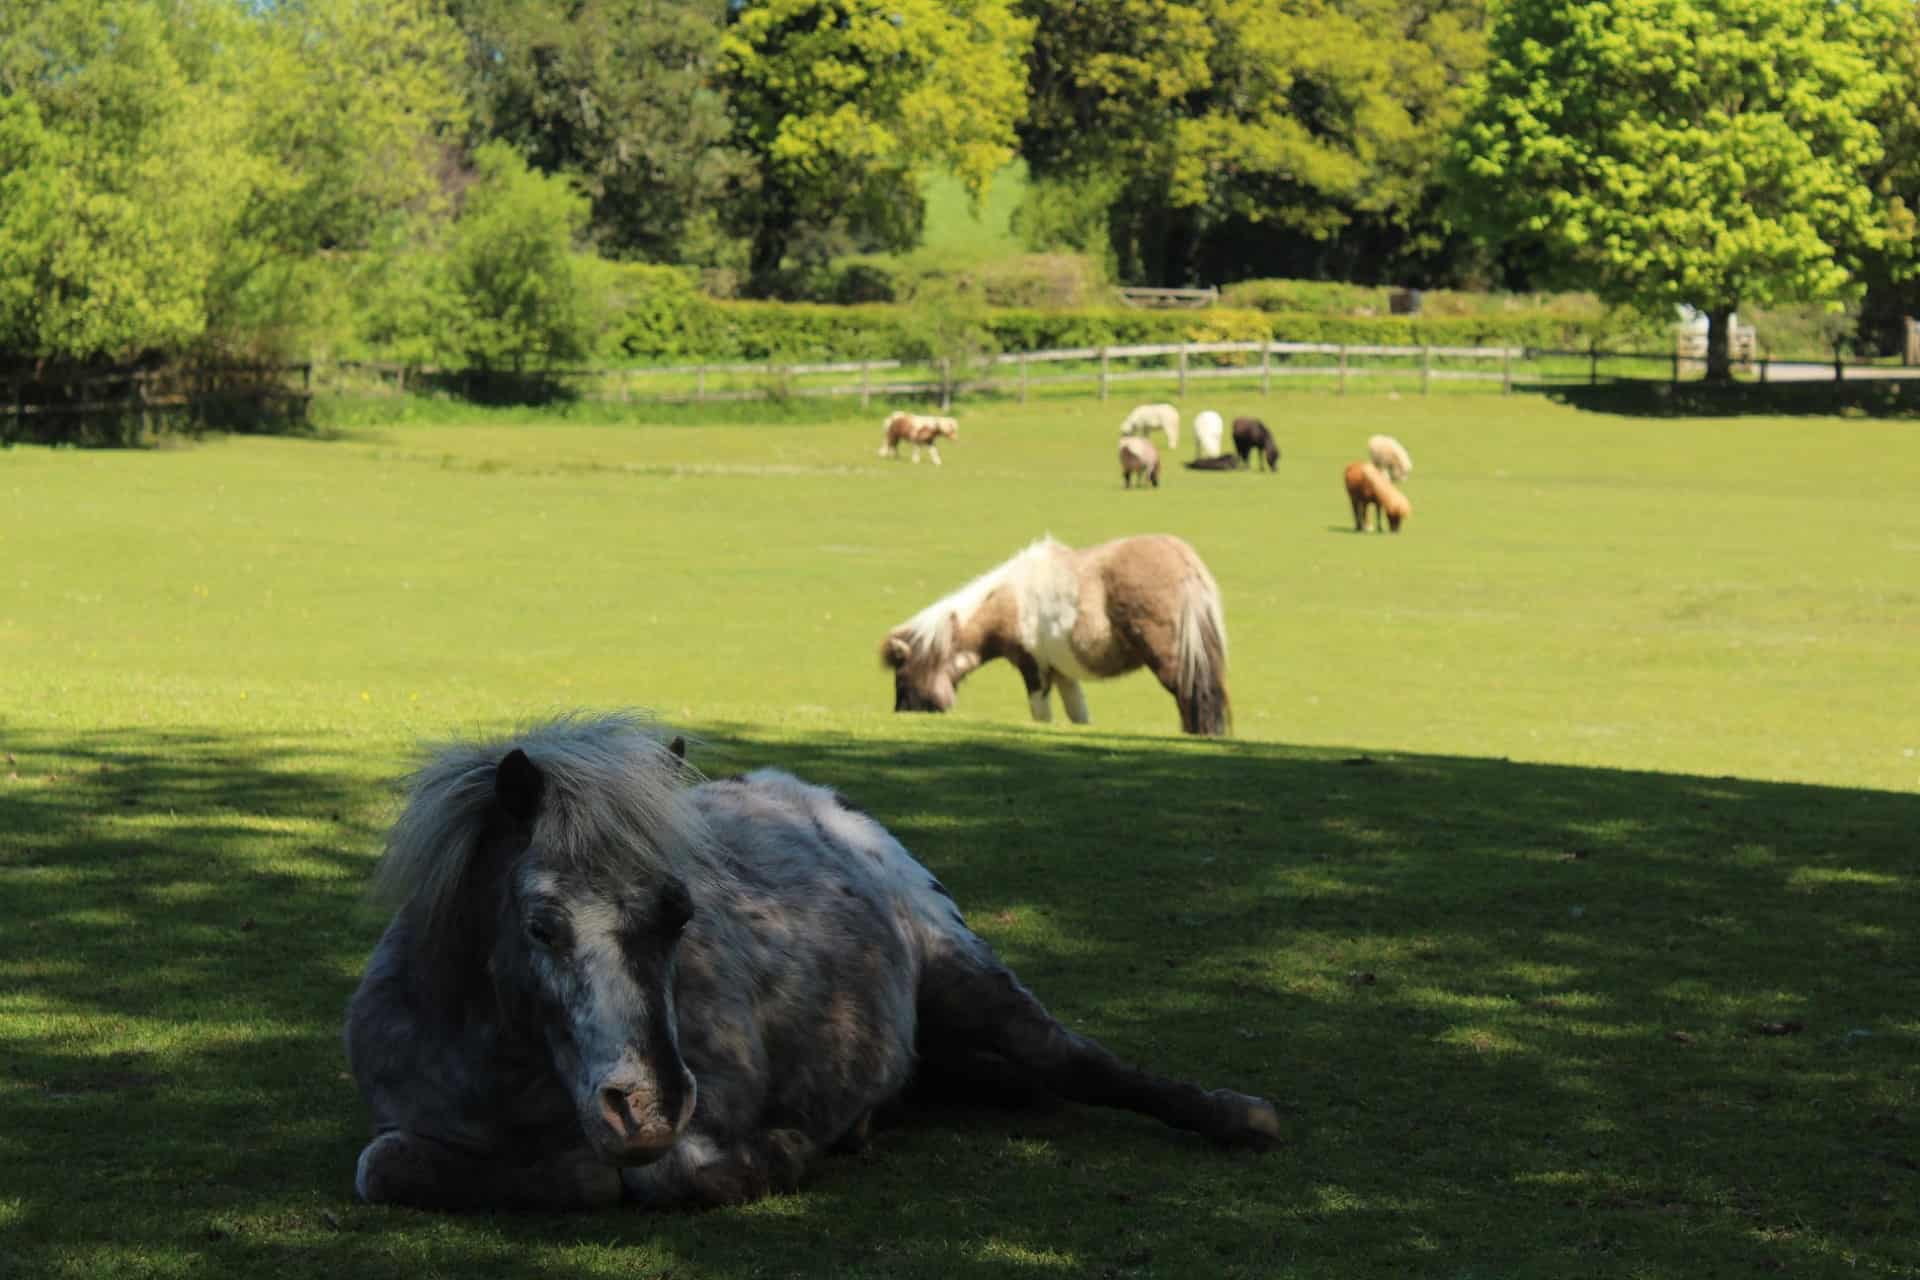 The Miniature Pony Centre in UK